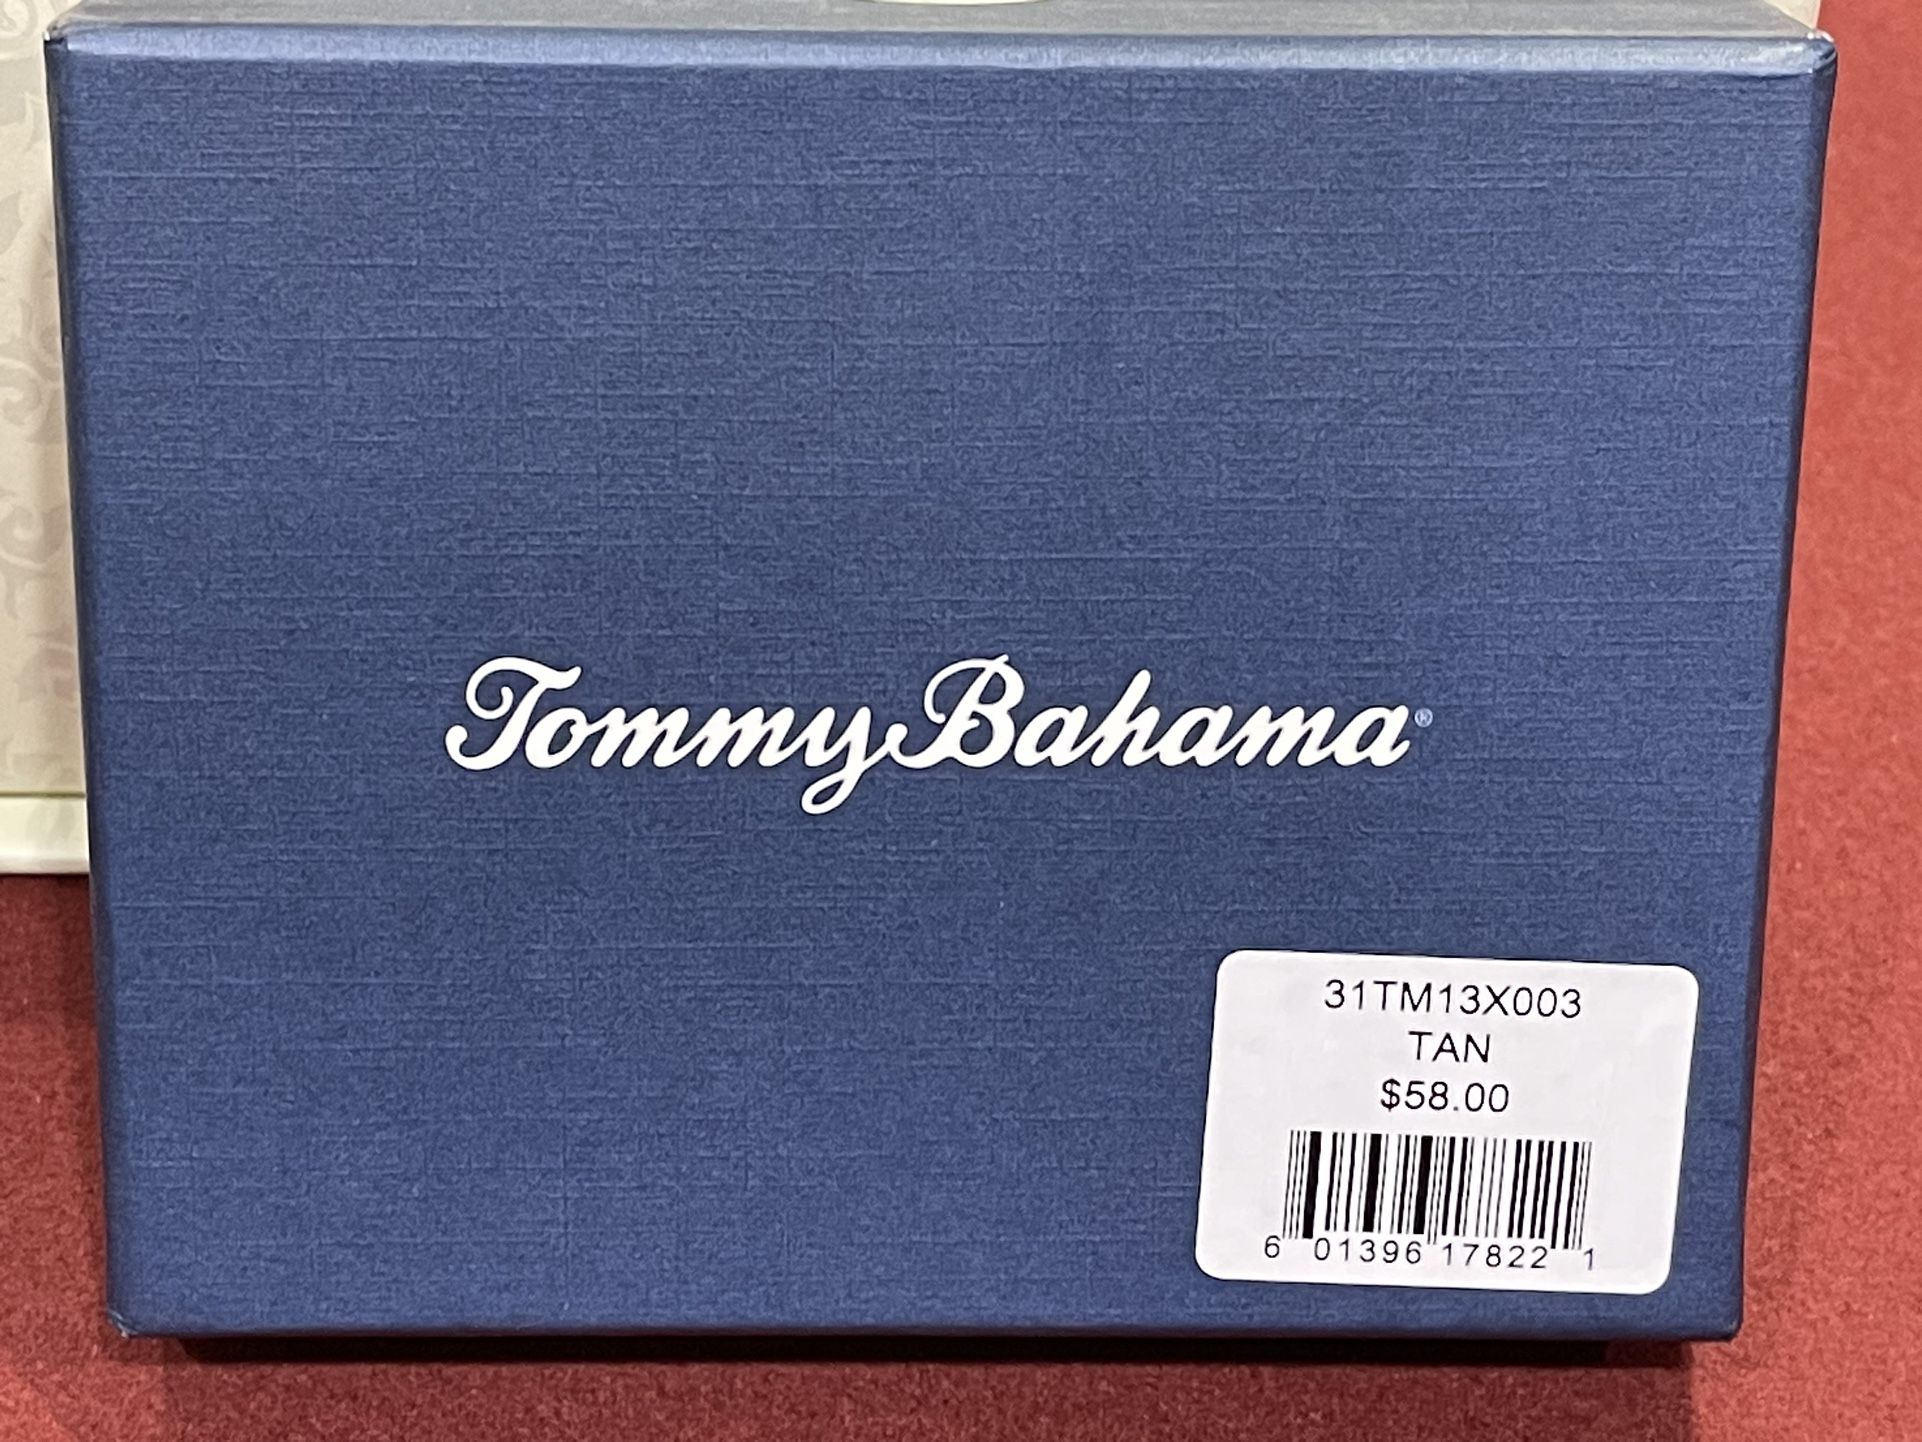 MAKE OFFER - BRAND NEW Tommy Bahama Leather Wallet